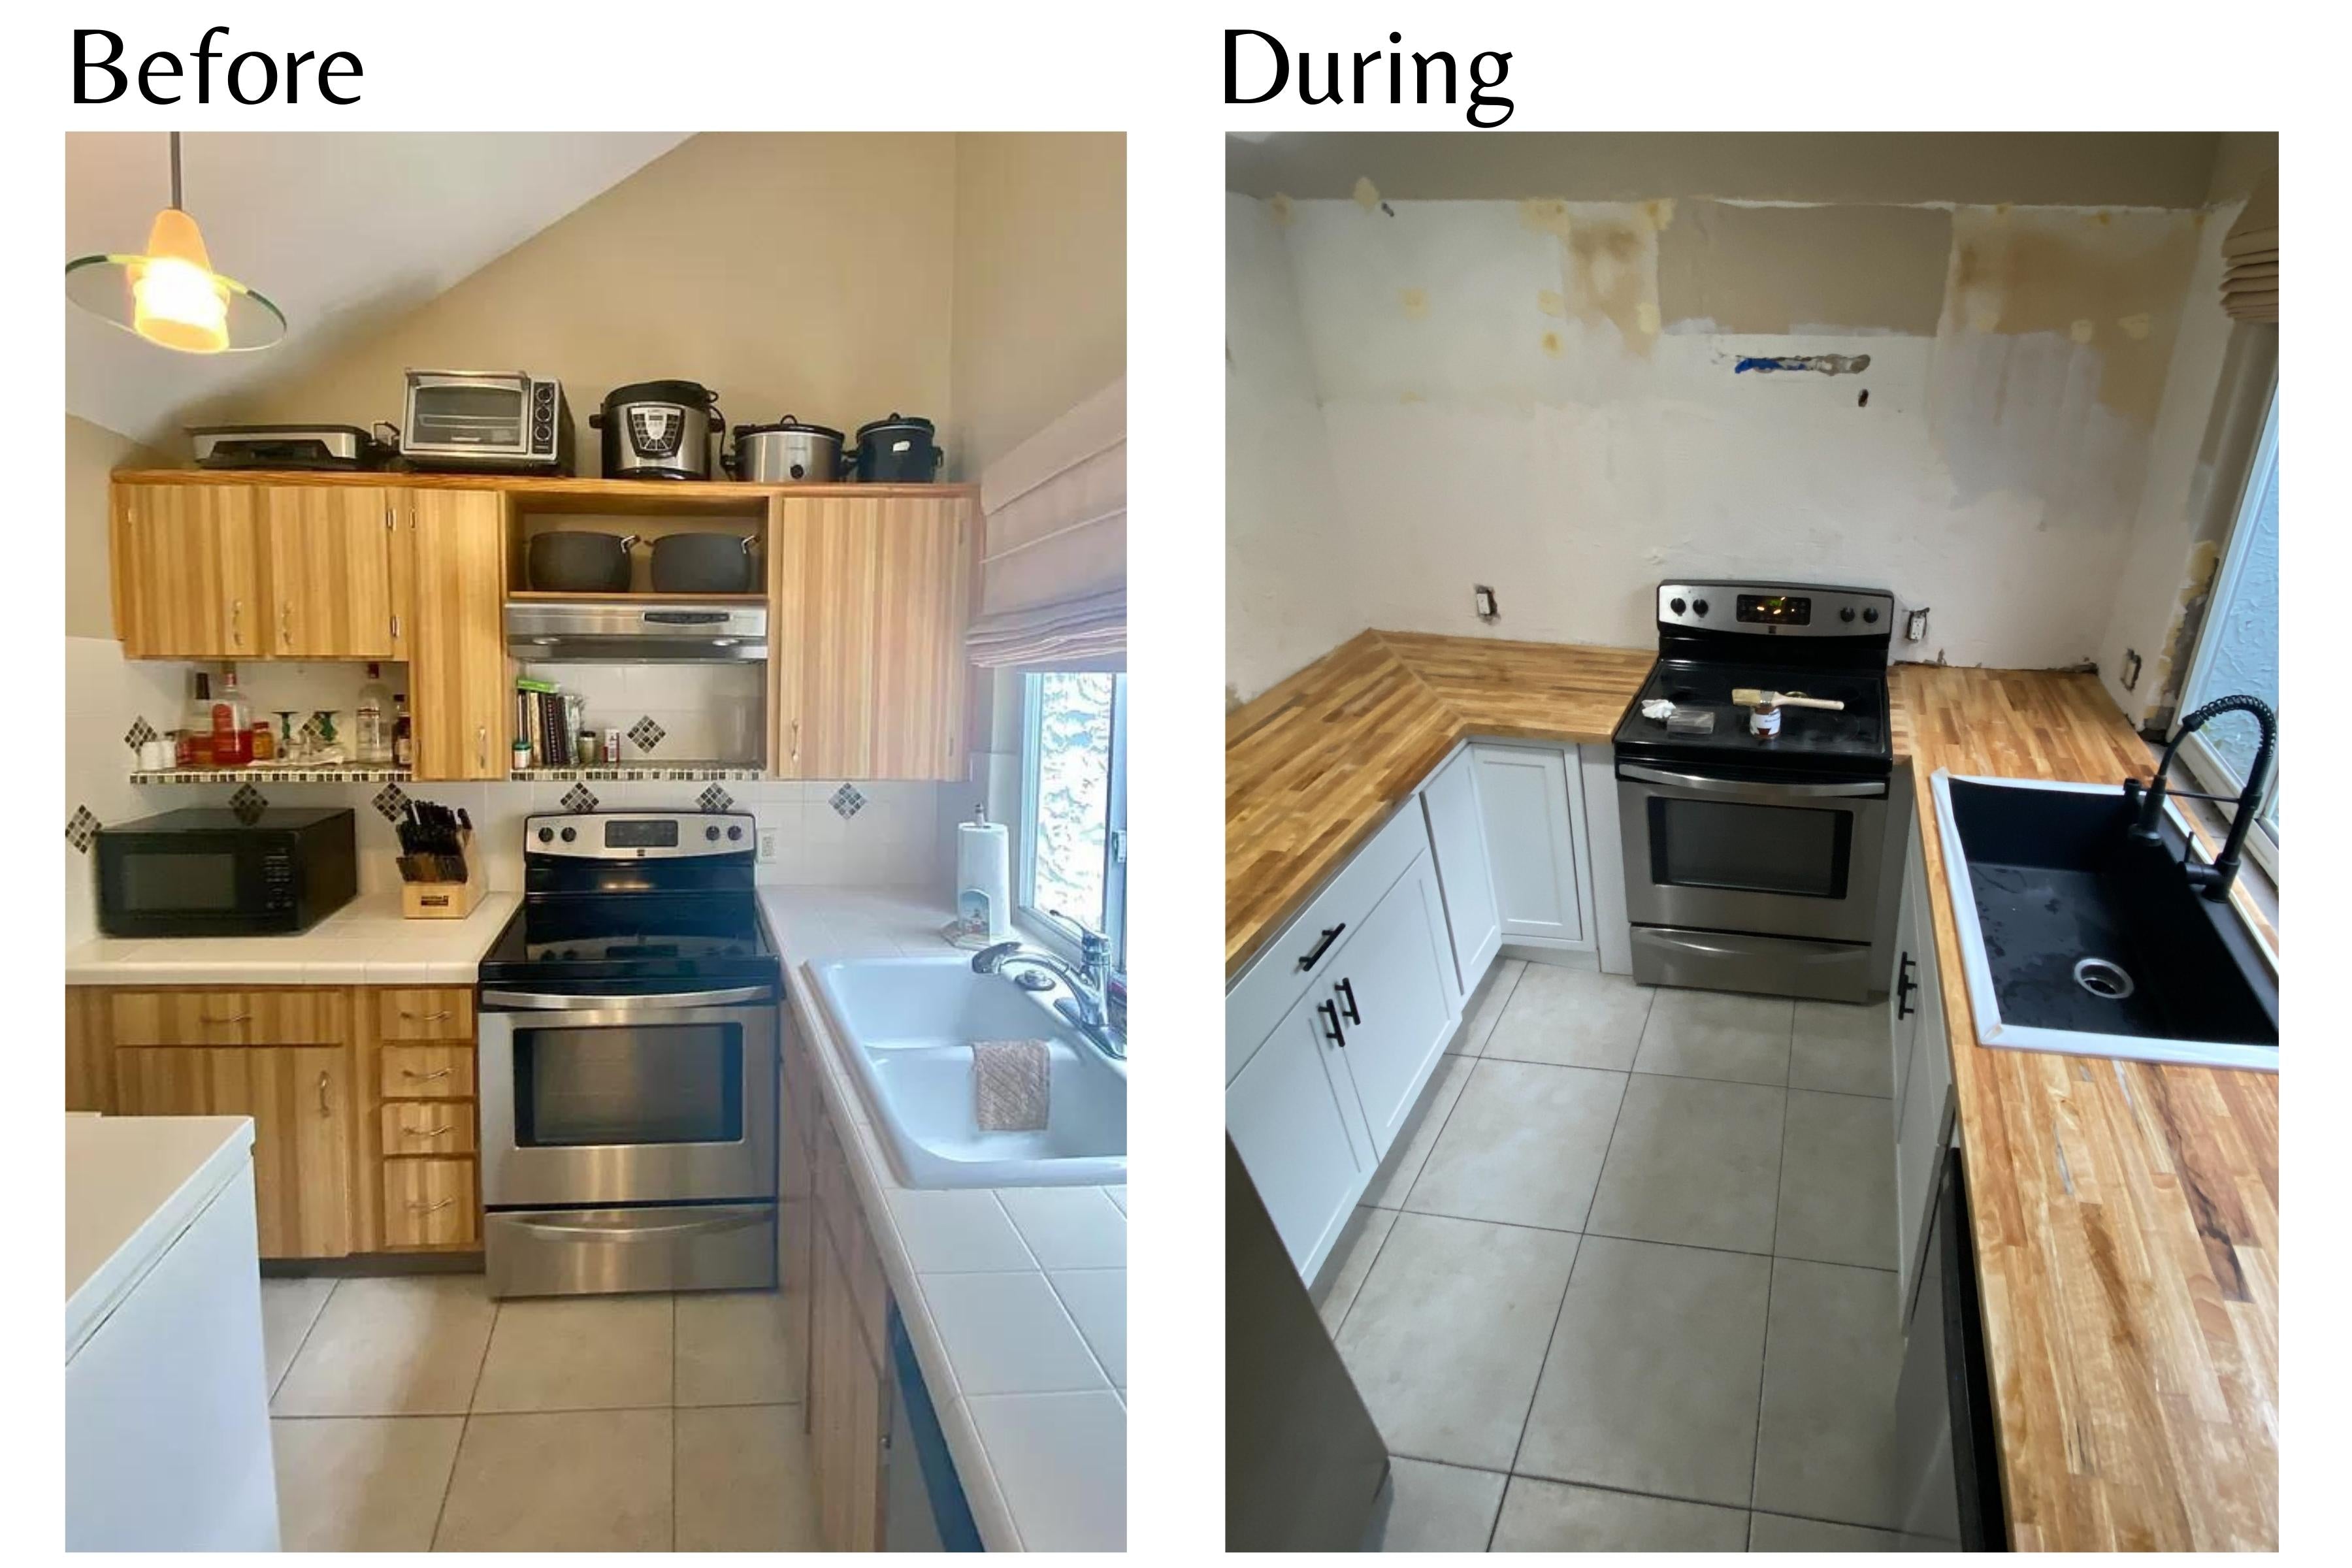 Photos of kitchen before with all dated cabinets and during with removed top cabinets